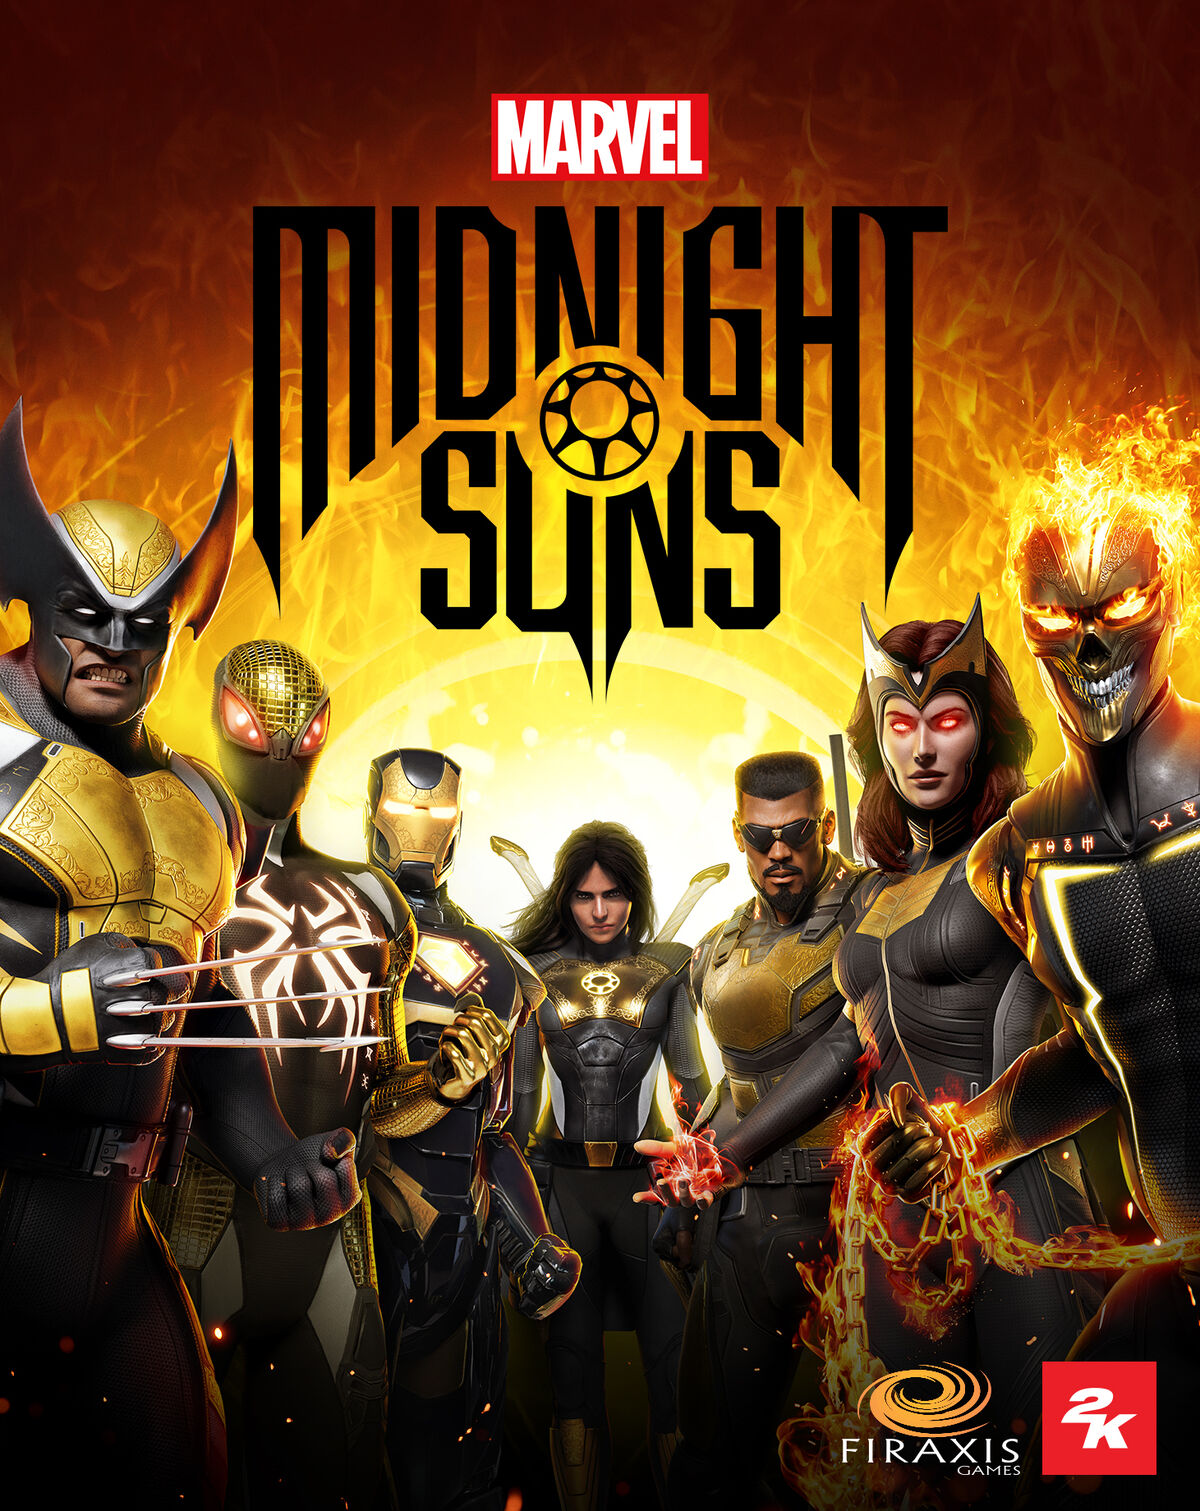 Marvel's Midnight Suns Now Available Worldwide Today for Windows PC, Xbox  Series X, S and PlayStation 5